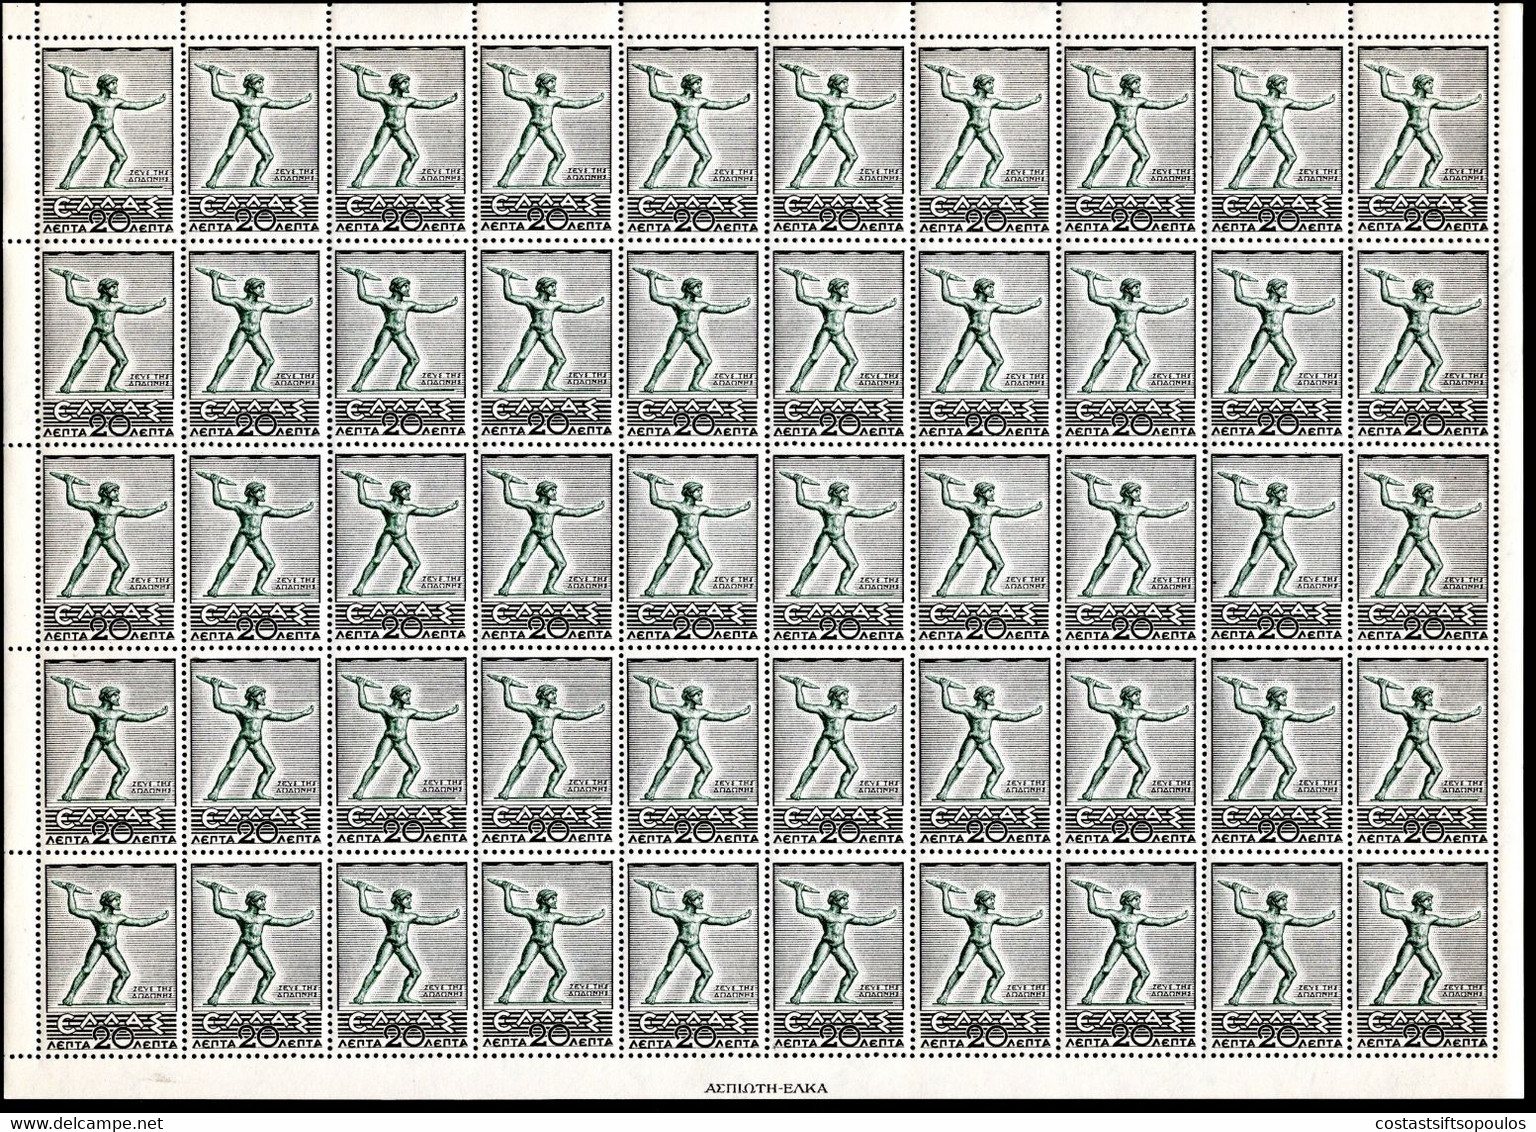 457.GREECE.1937 HISTORICAL.20 L.ZEUS,MNH SHEET OF 50.FOLDED IN THE MIDDLE,WILL BE SHIPPED FOLDED - Feuilles Complètes Et Multiples